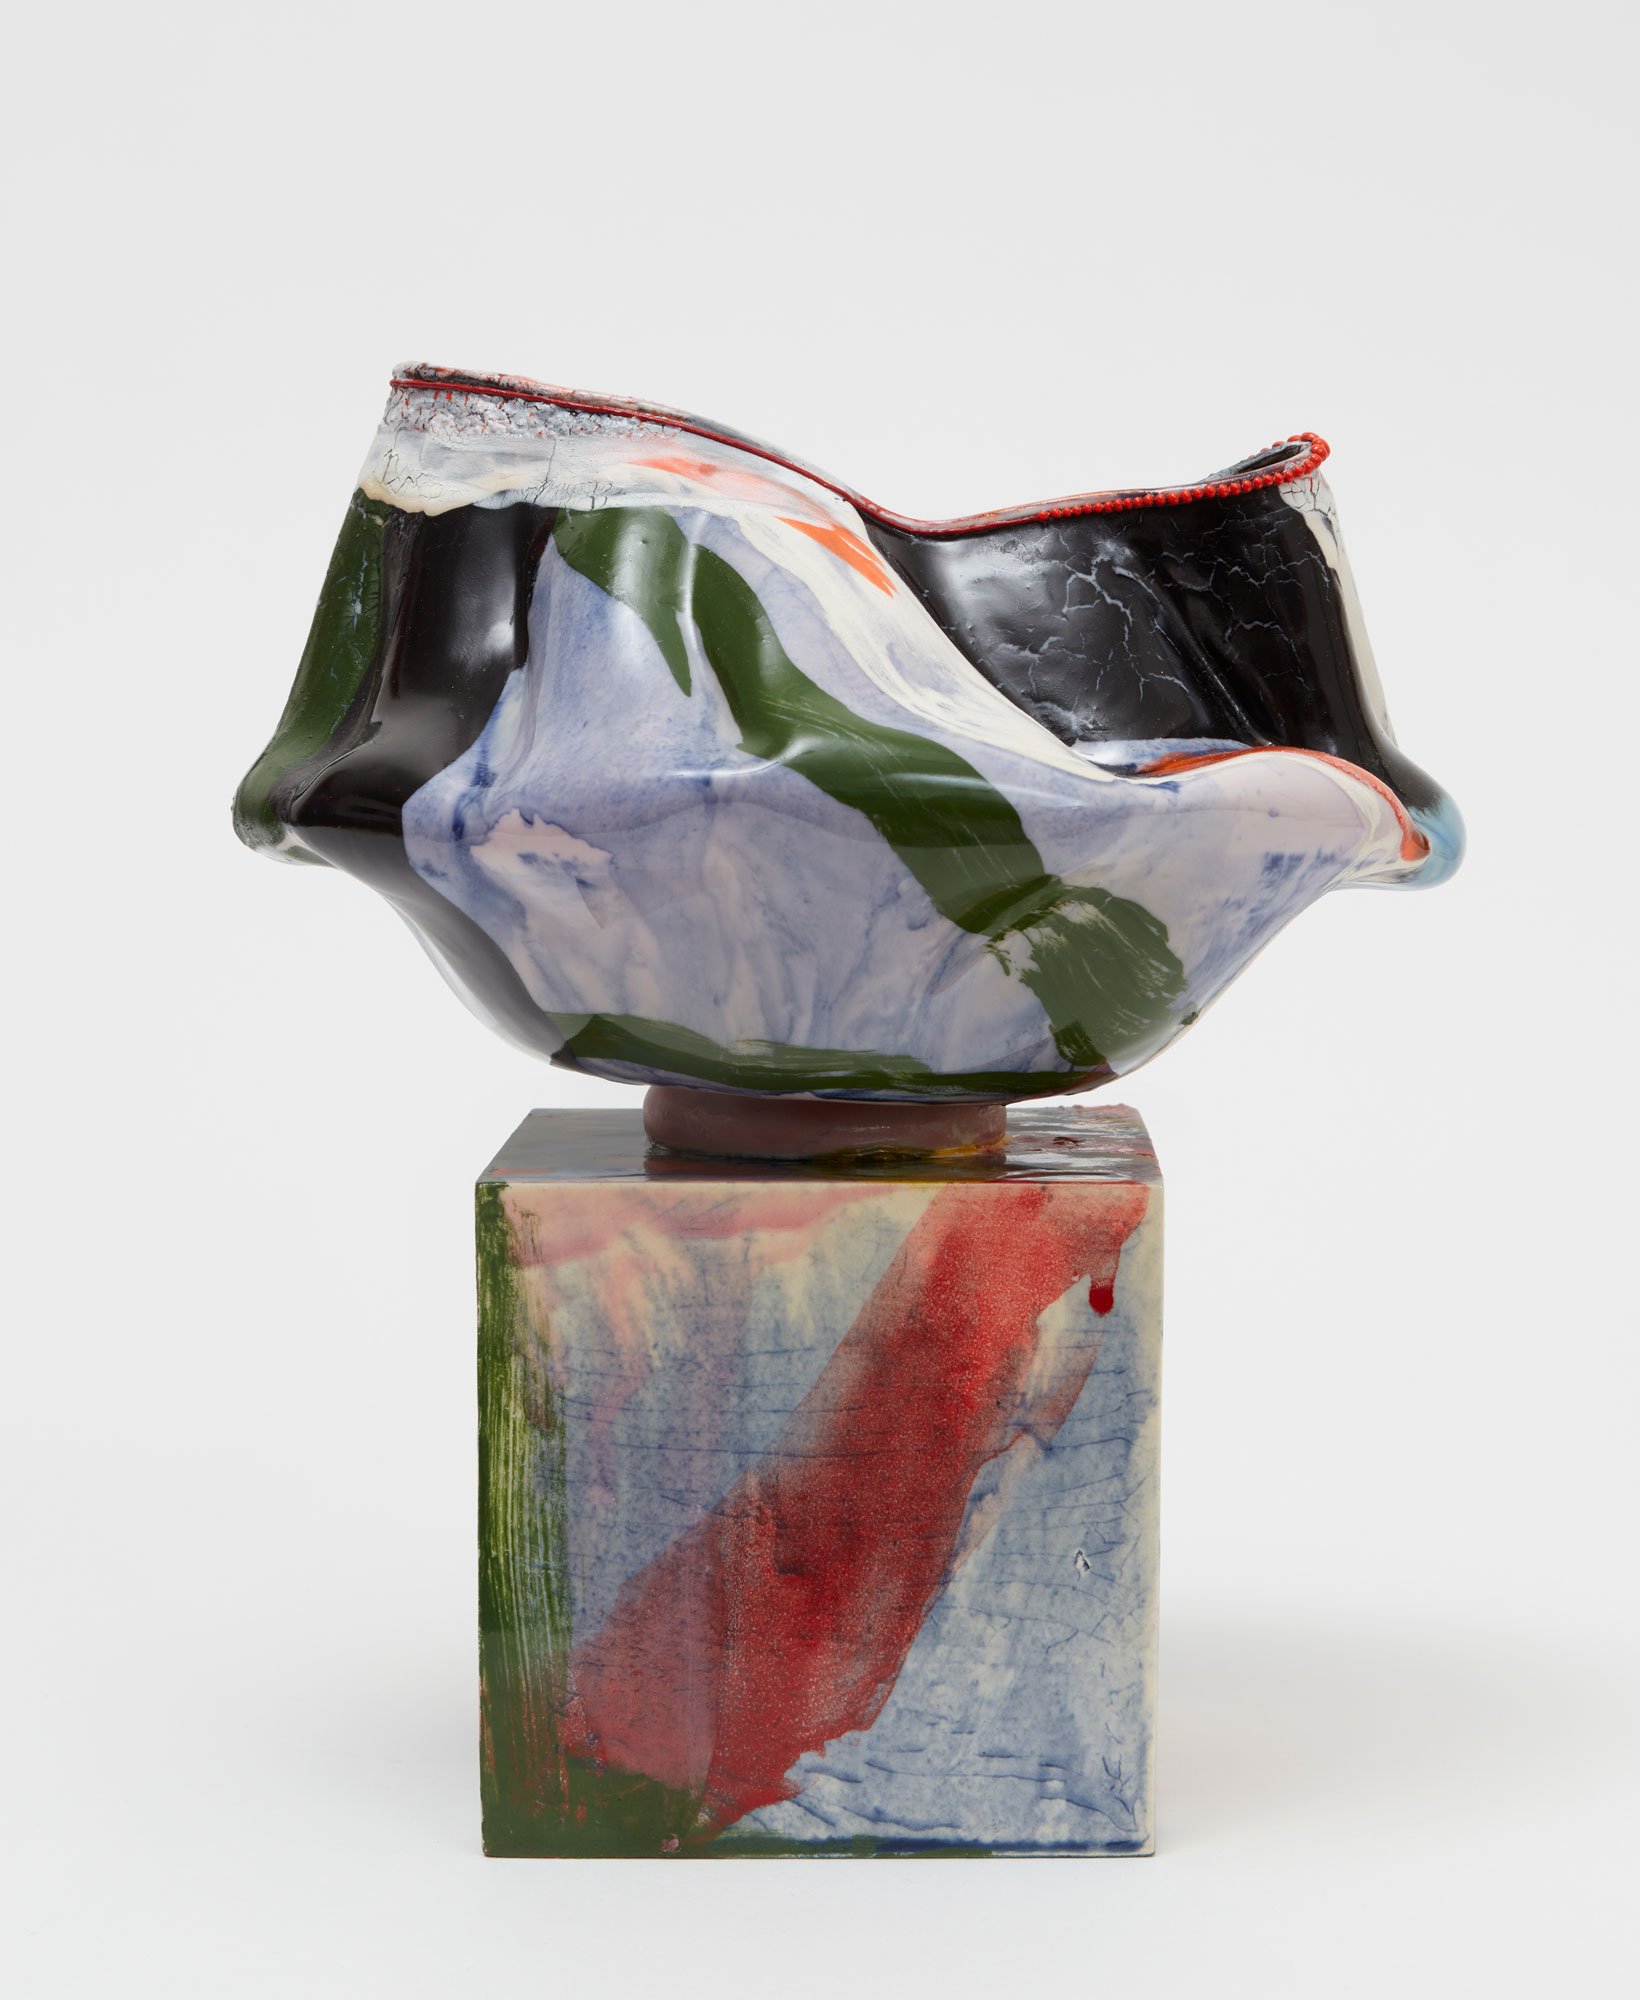  Kathy Butterly (United States, born 1963),  Summation , 2021, porcelain, earthenware, glaze, 8 3/8 x 7 1/4 x 5 3/4 inches. Courtesy of James Cohan Gallery, New York. © Kathy Butterly. Image courtesy the artist and James Cohan, New York. Photo: Alan 